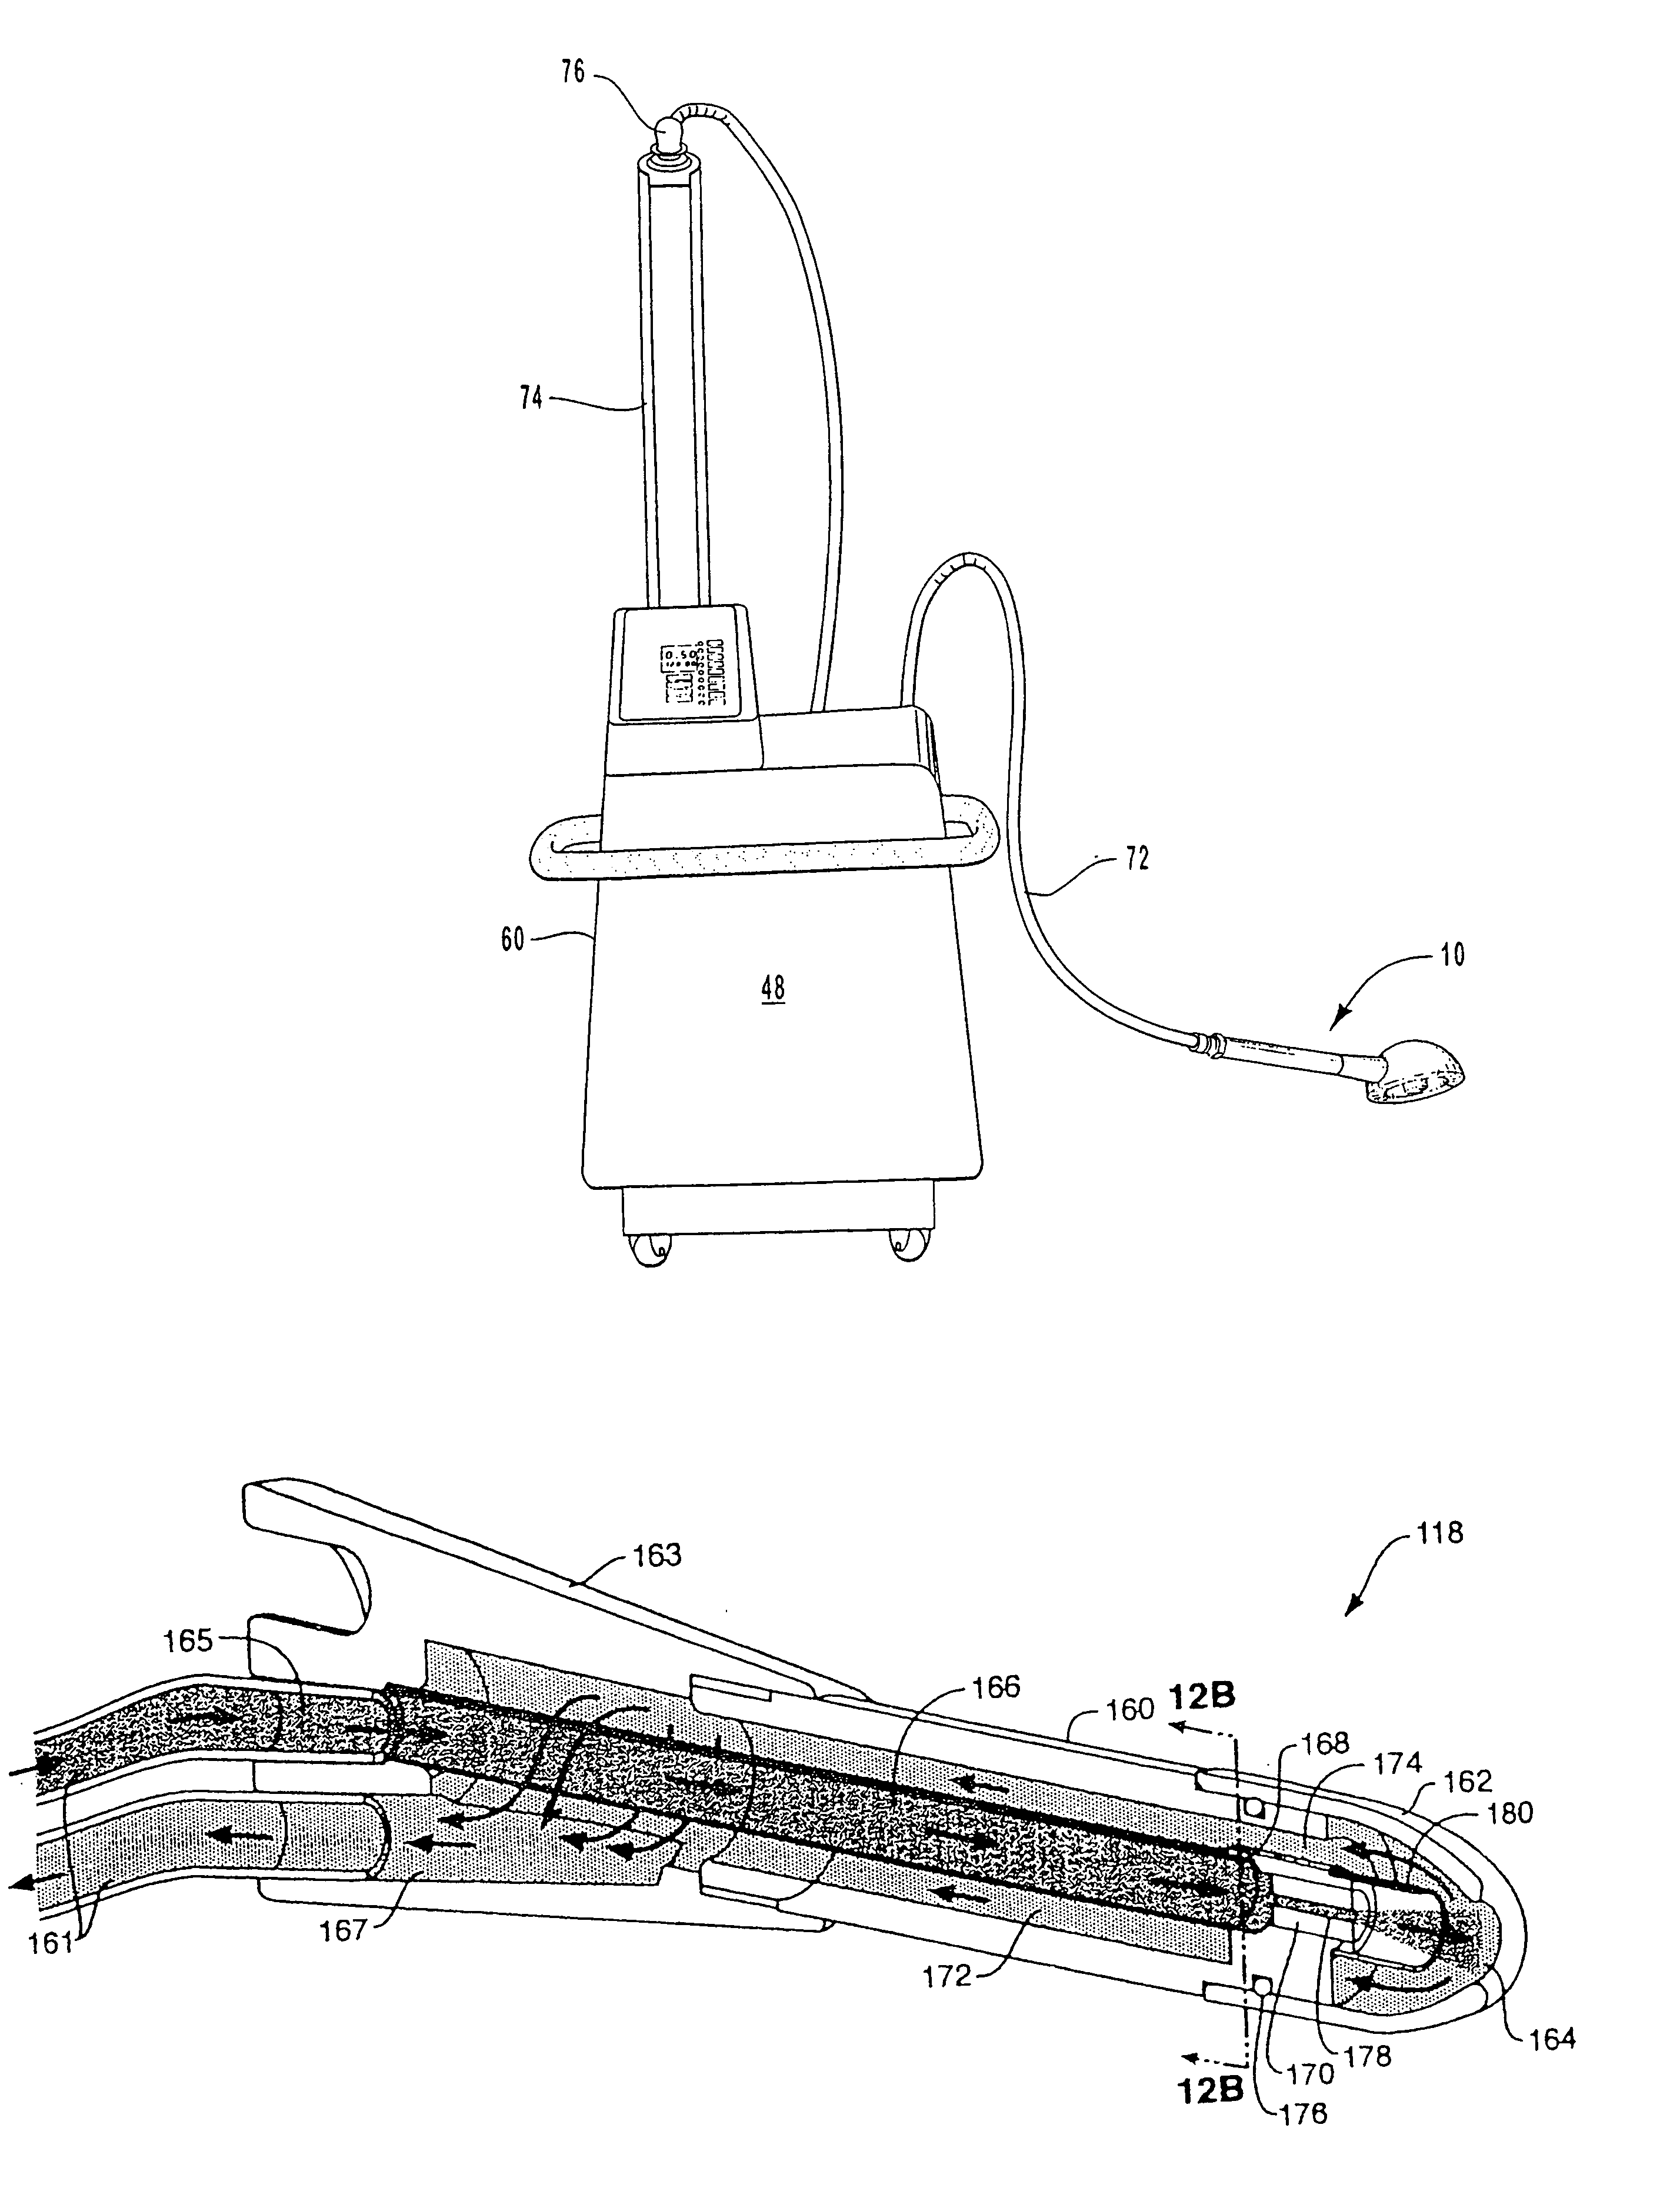 Method and system for performing microabrasion and suction massage